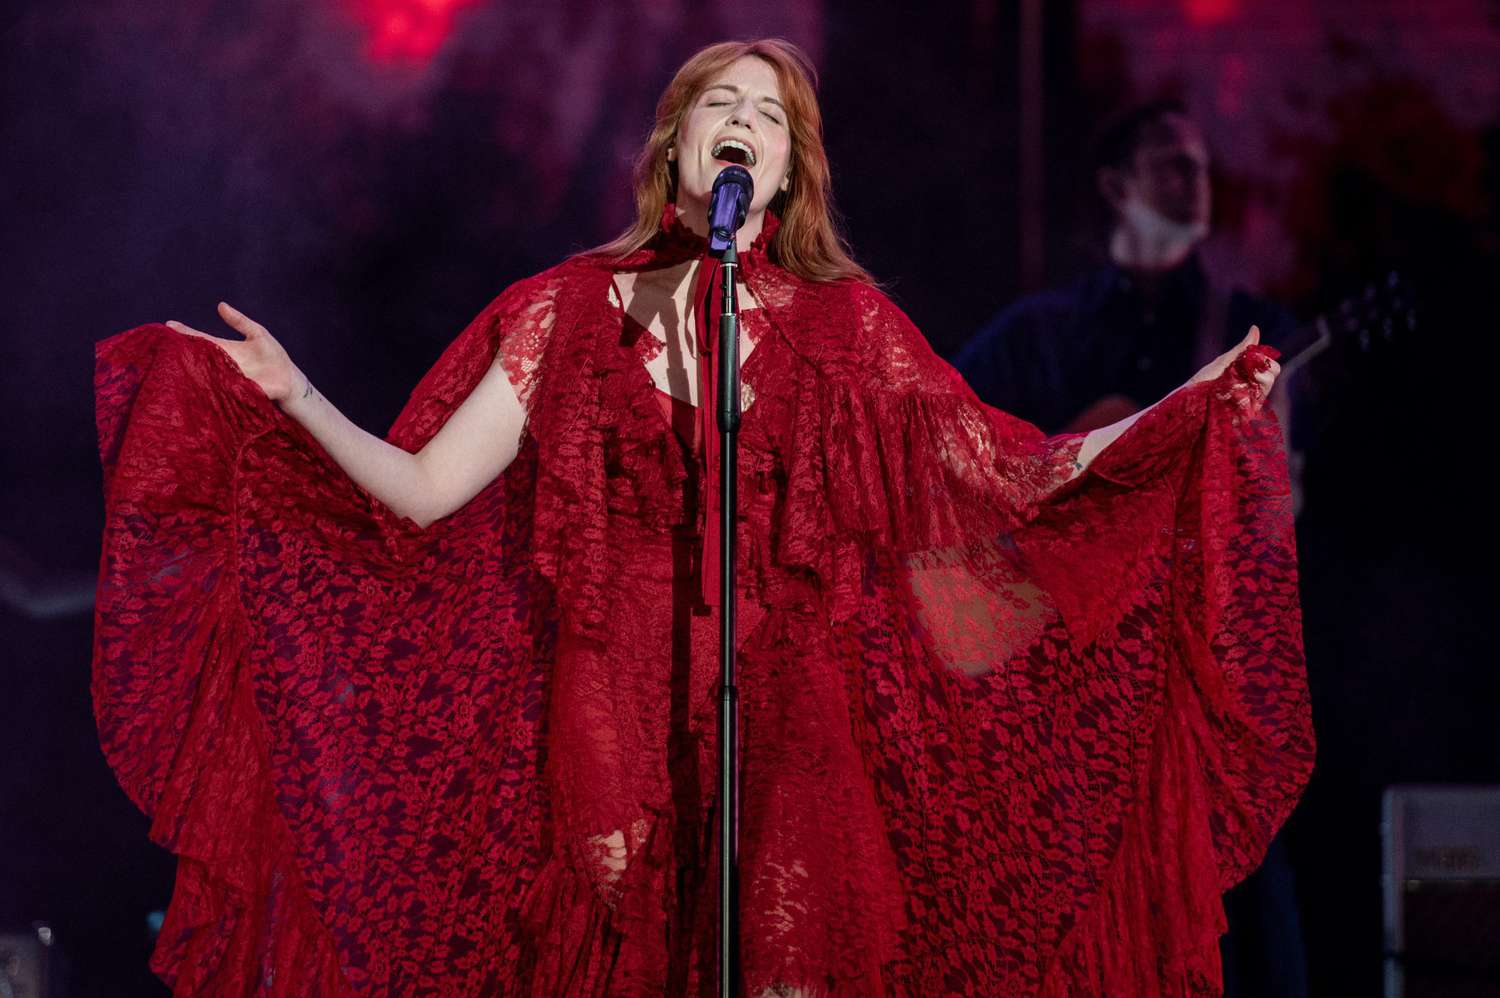 LISBON, PORTUGAL - JULY 07: Florence Welch of Florence & The Machine performs on the NOS stage at day 2 of NOS Alive festival on July 07, 2022 in Lisbon, Portugal. (Photo by Pedro Gomes/Redferns)